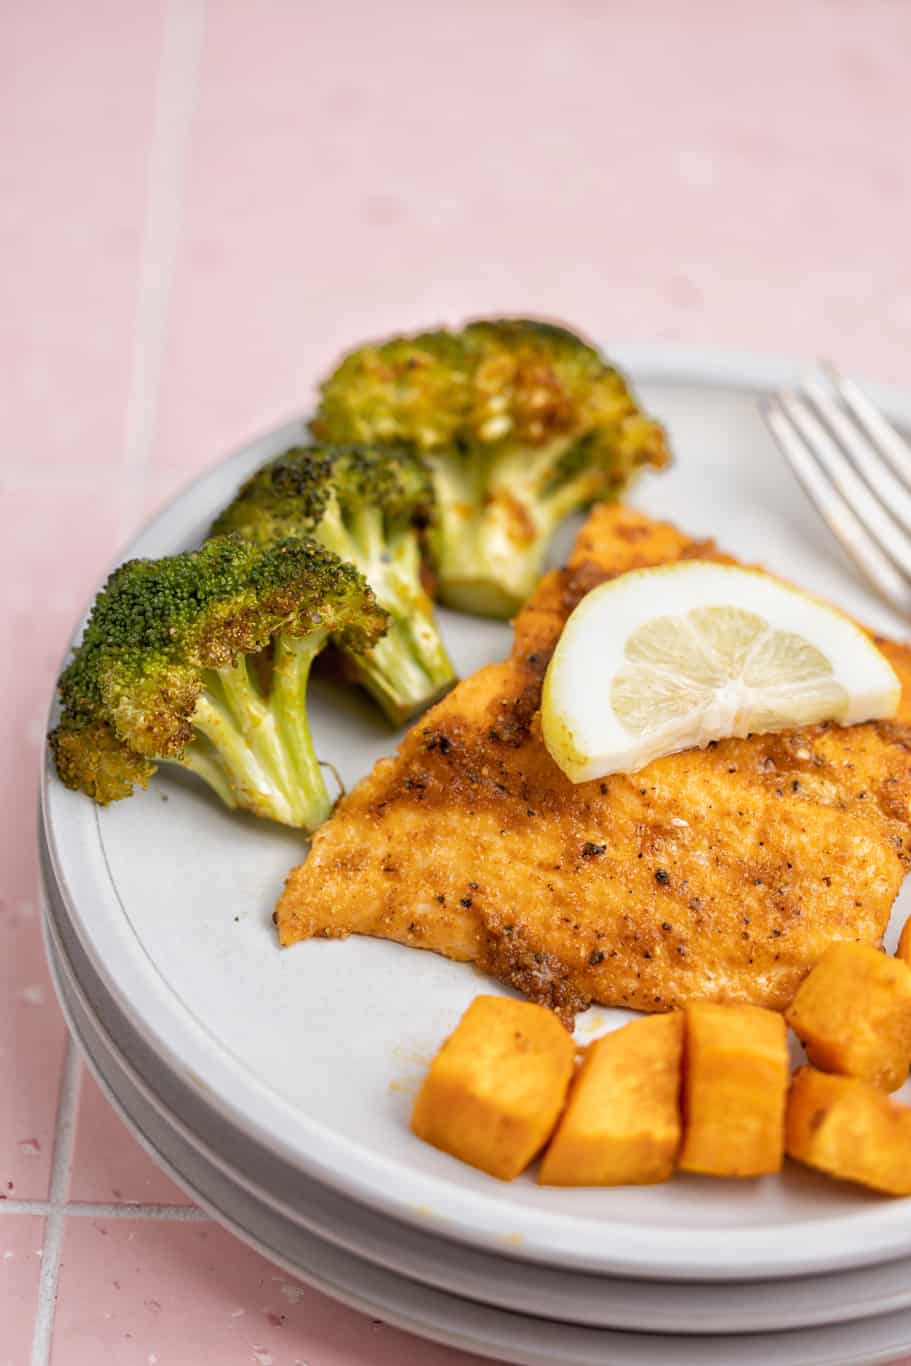 salmon filet served with sweet potatoes, broccoli, and a lemon slice served on a white dish